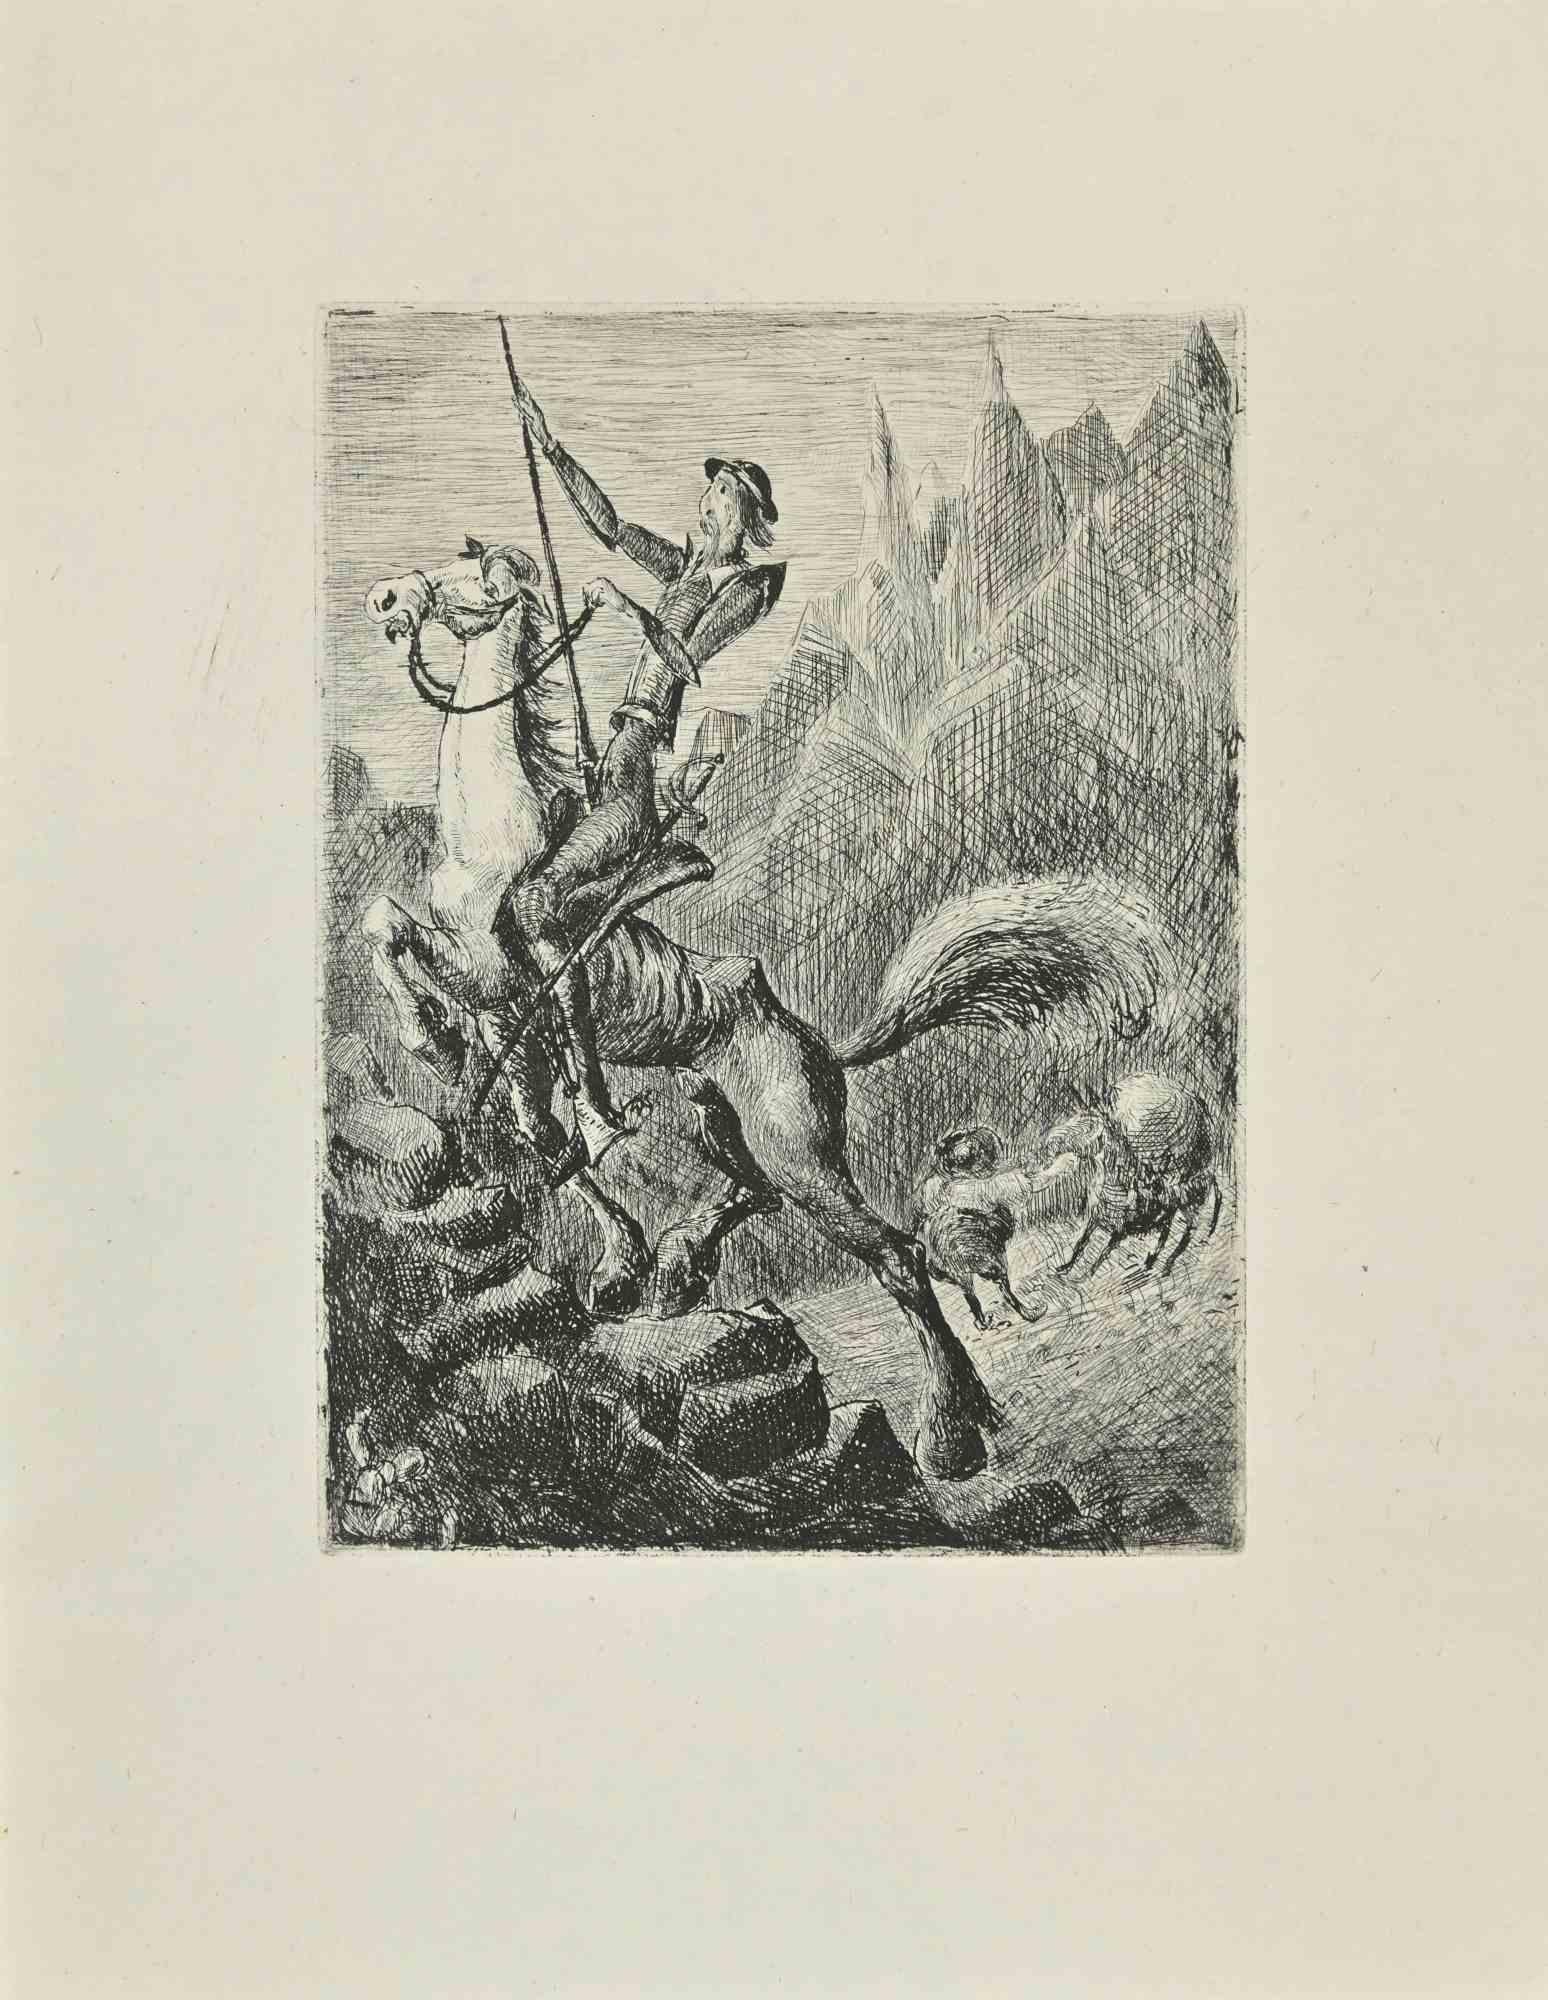 Don Quixote Galloping is an etching and drypoint print on ivory-colored China paper, realized by Wladyslaw Jahl in 1951.

It belongs to a limited edition of 125 specimens.

Good conditions with slight folding of paper.

The artwork represents a